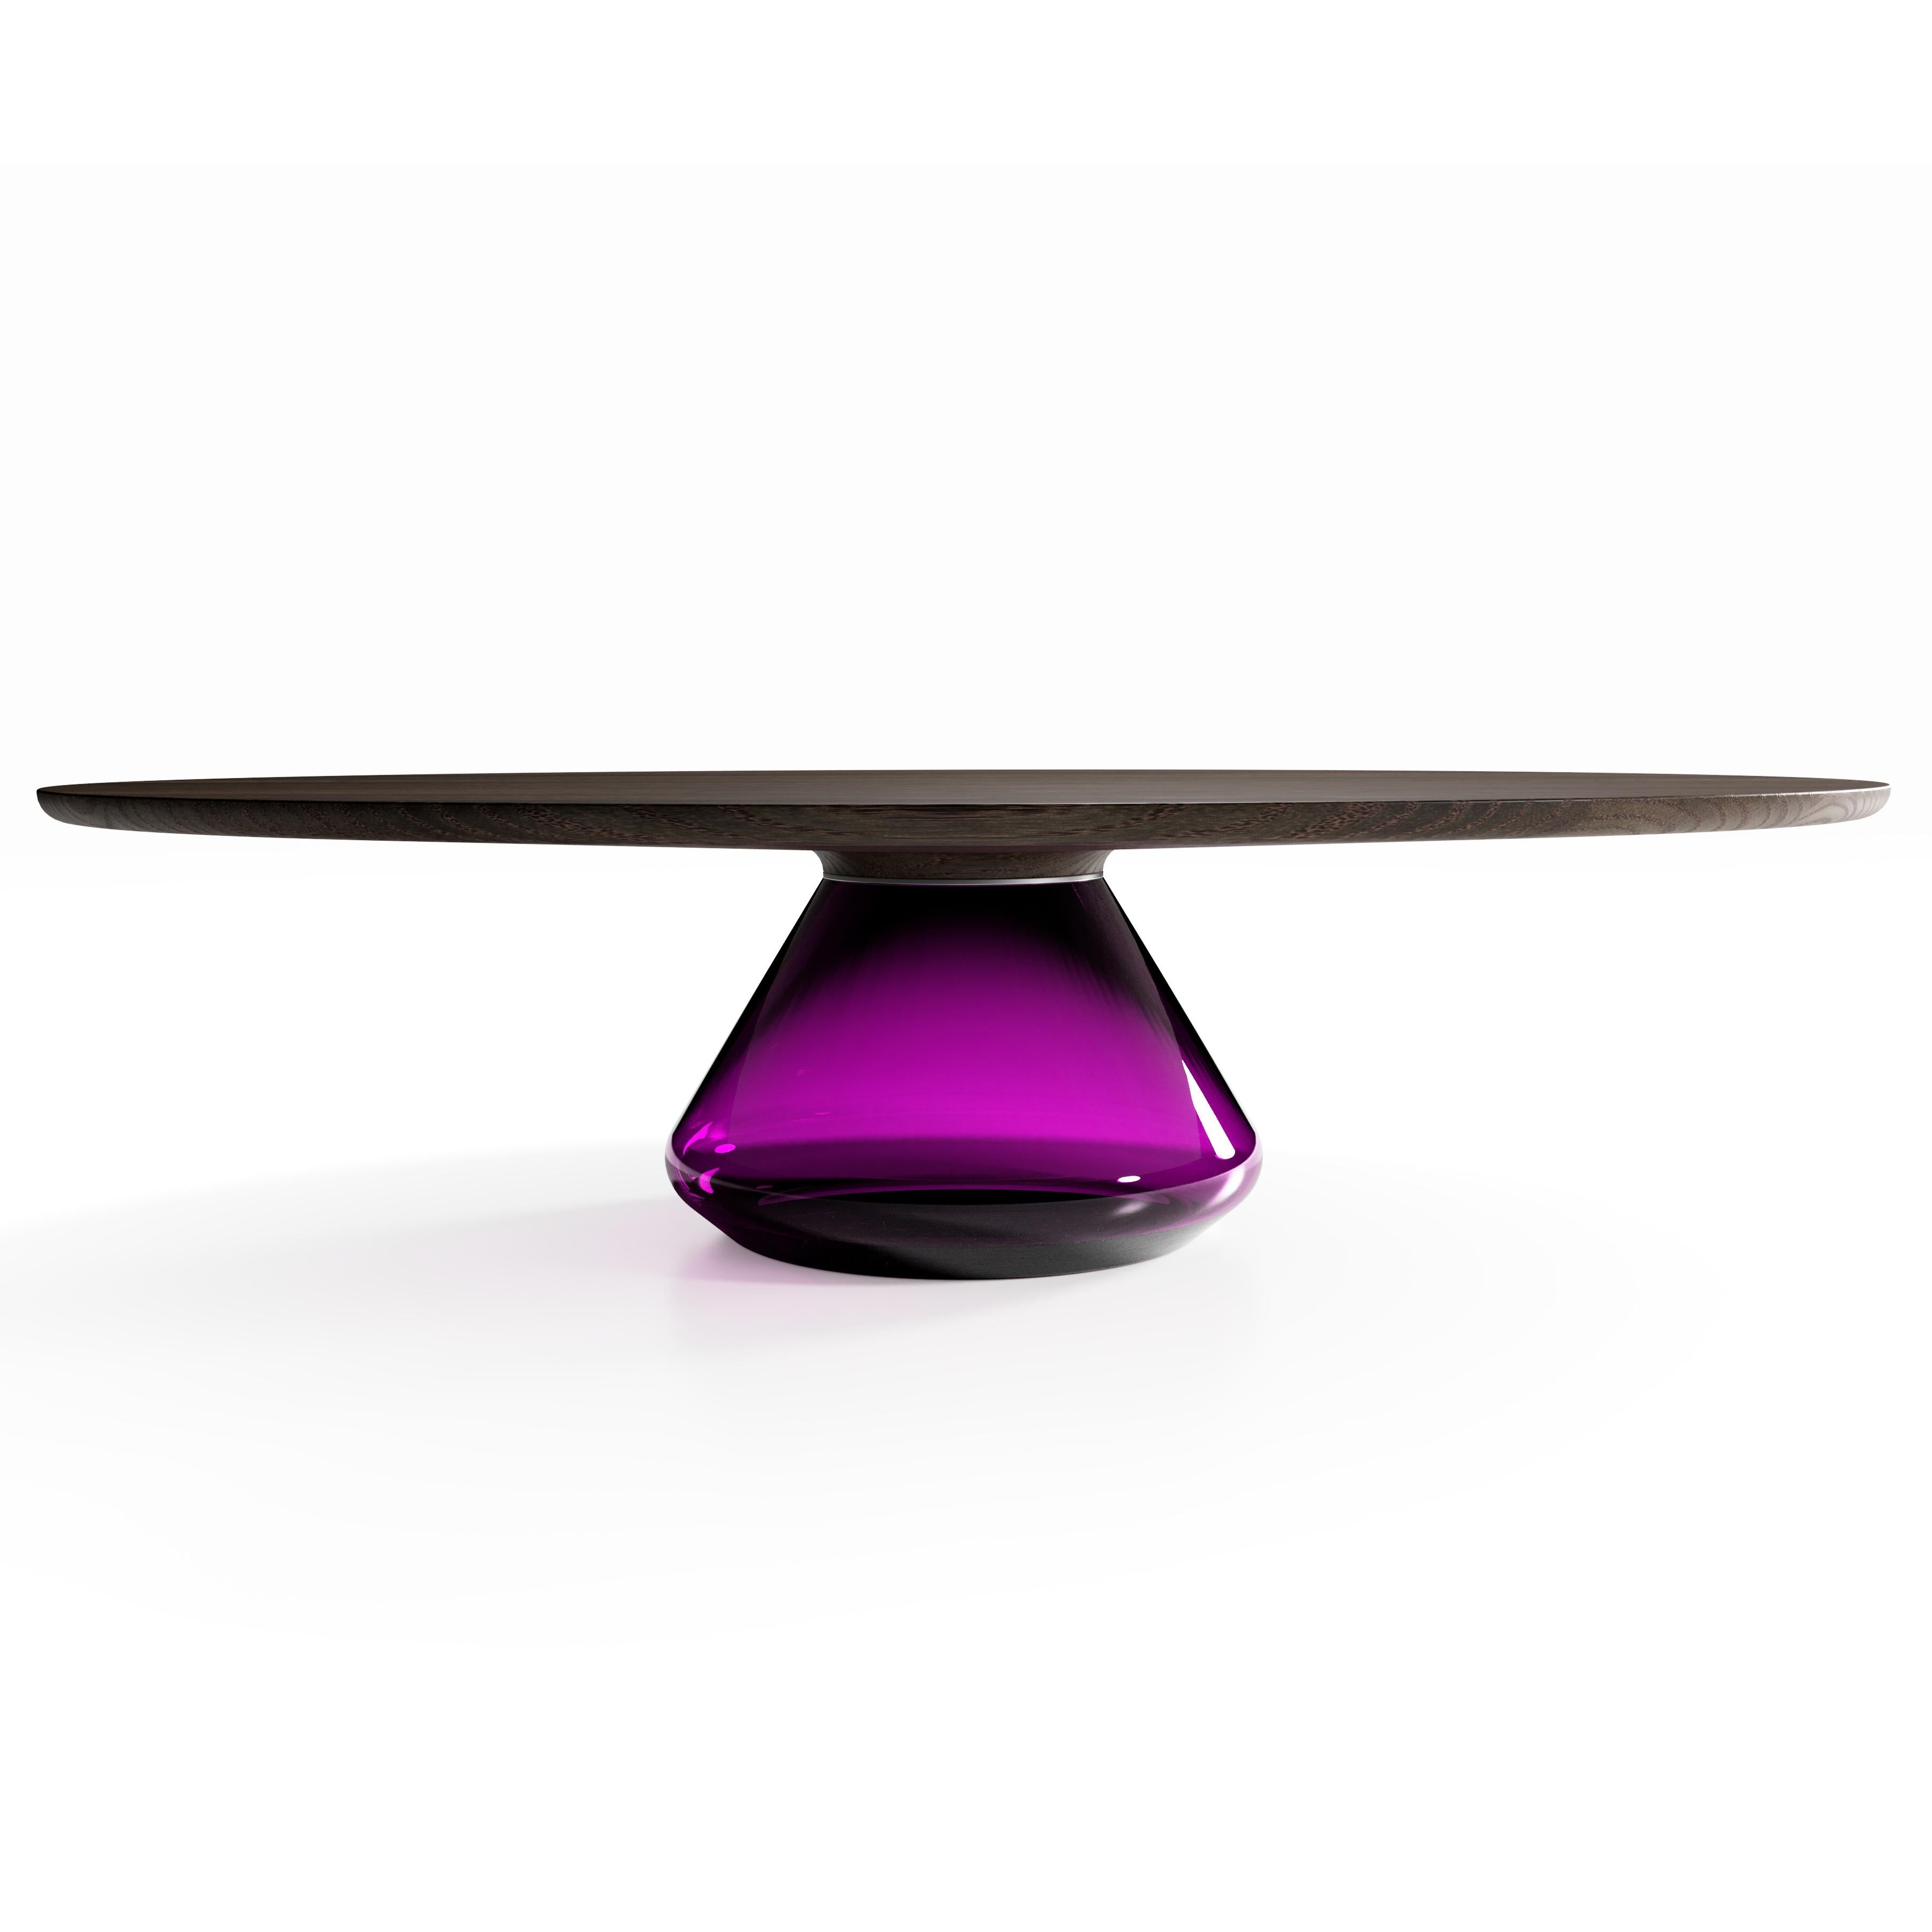 The Charoite Eclipse I, limited edition coffee table by Grzegorz Majka
Limited edition of 8
Dimensions: 54 x 48 x 14 in
Materials: glass, oak

The total eclipse of every interior? With this amazing table everything is possible as with its